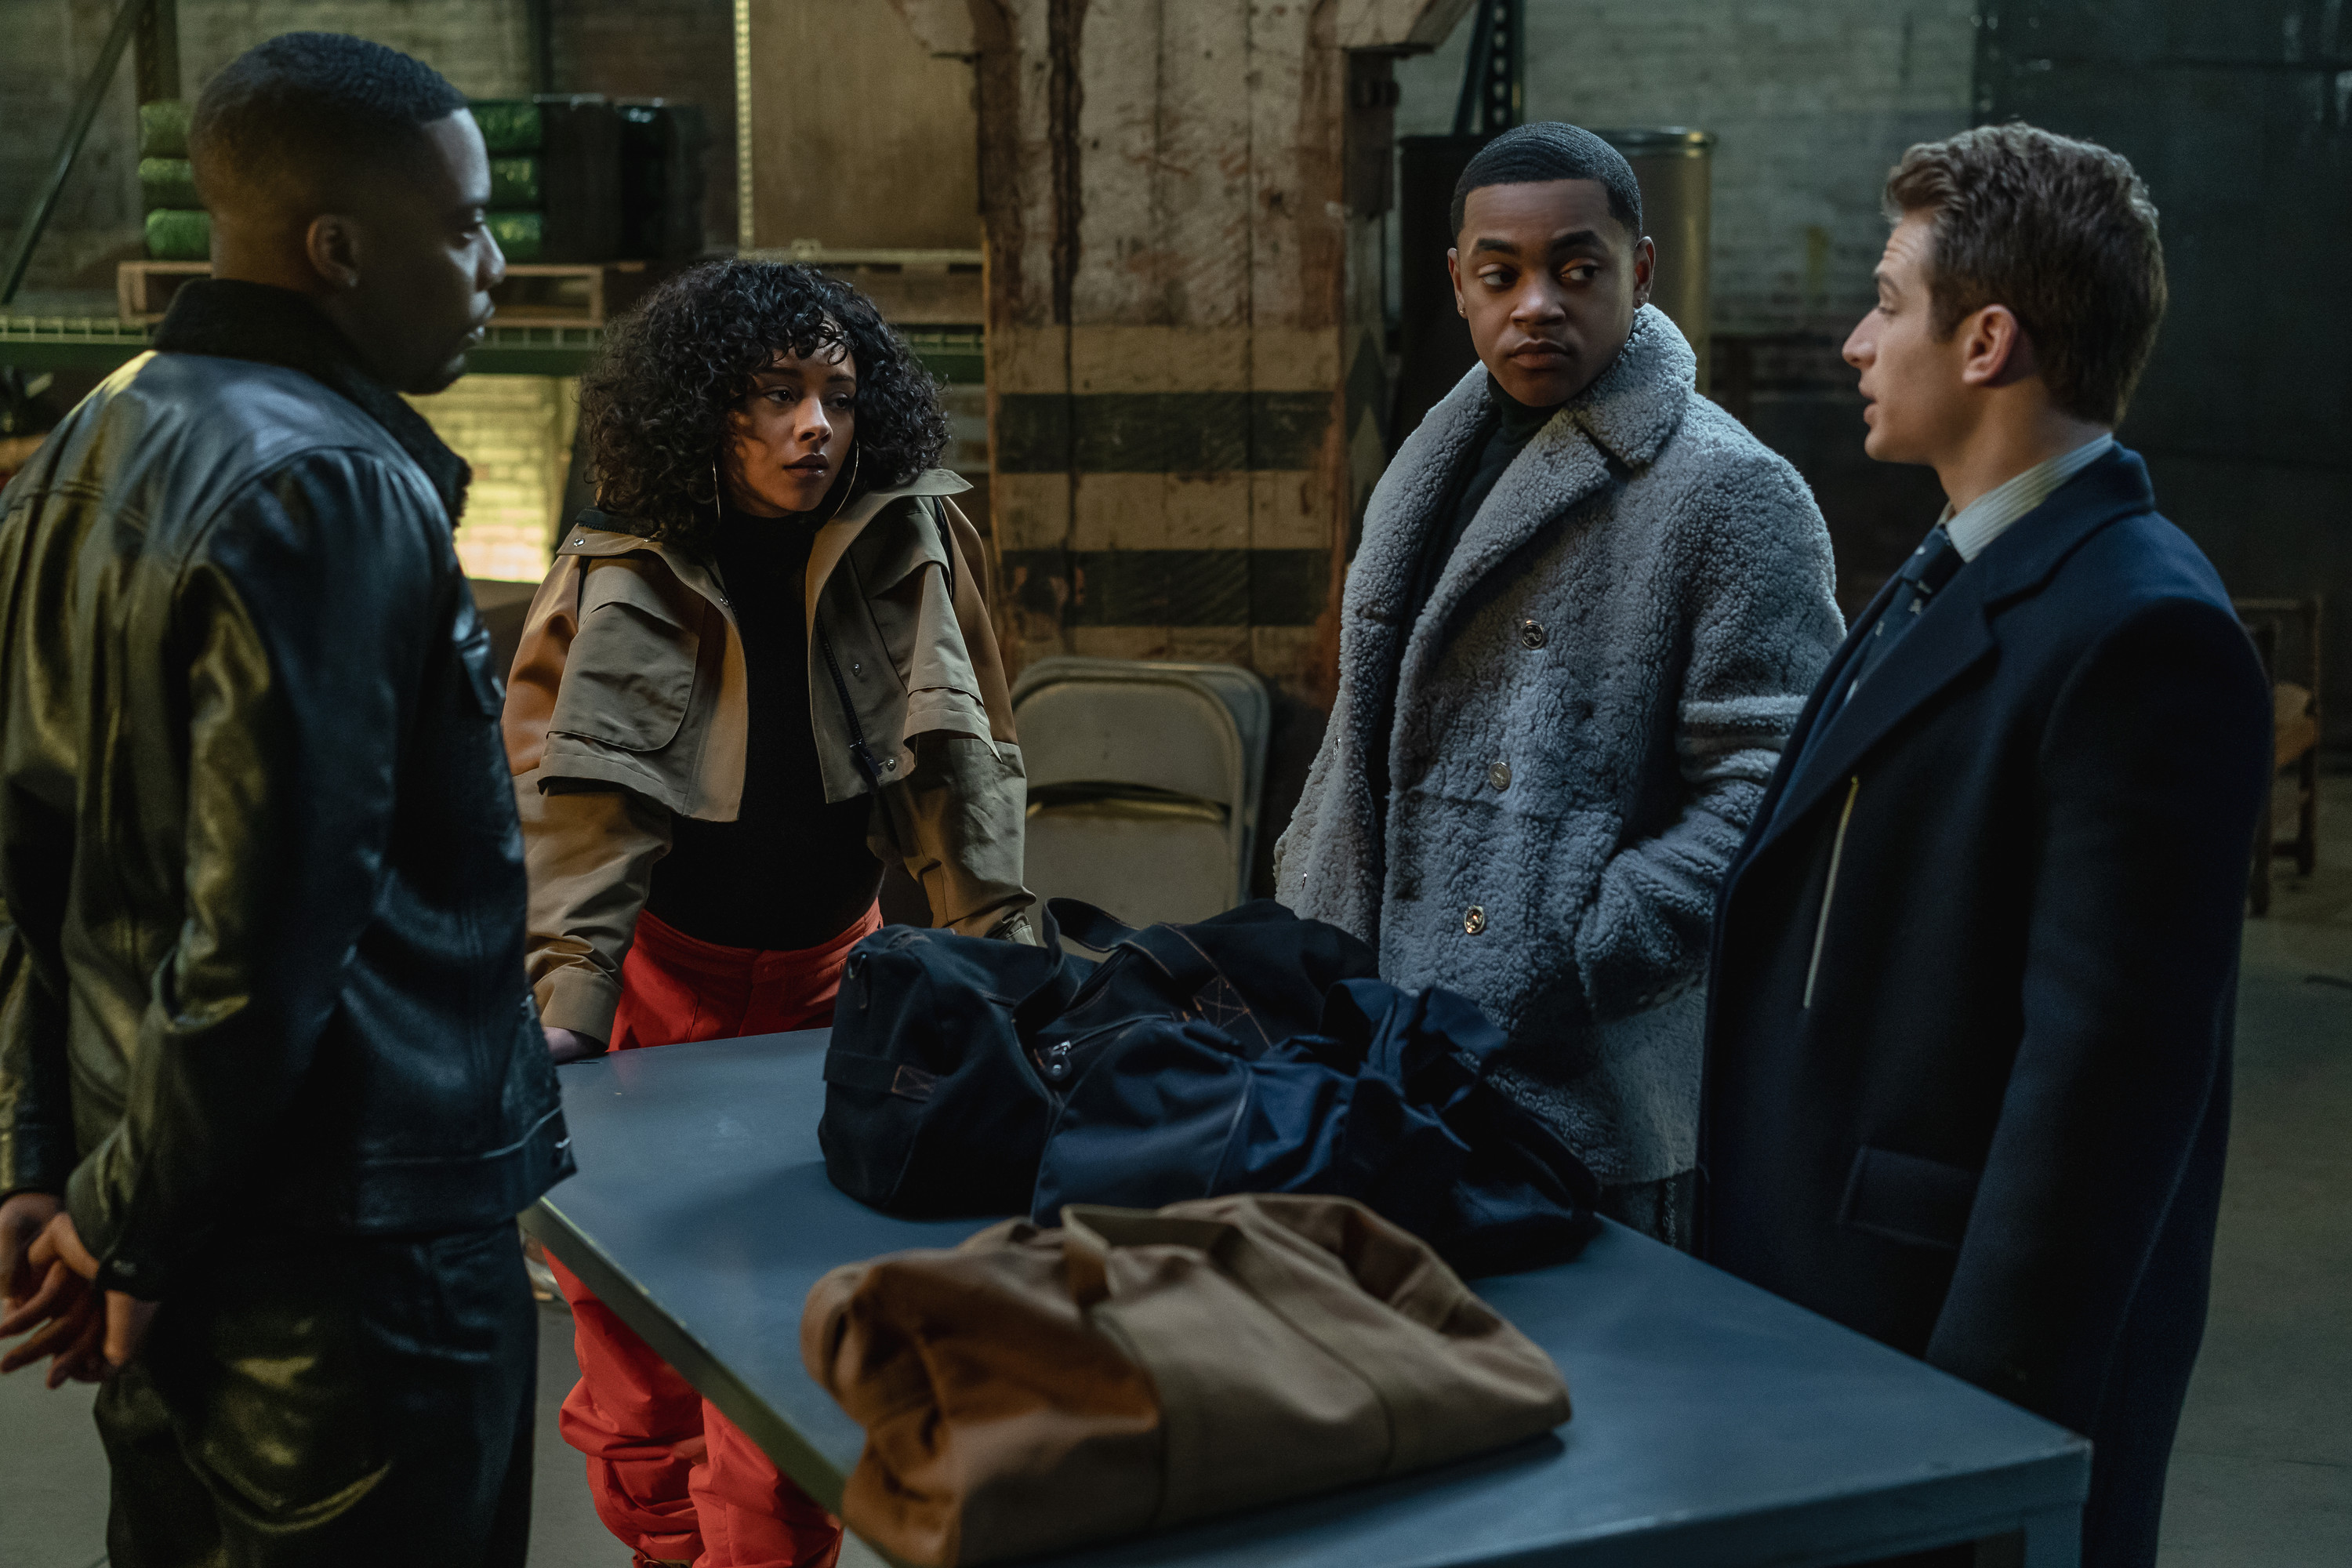 Woody McClain as Cane Tejada, Alix Lapri as Effie Morales, Michael Rainey Jr. as Tariq St. Patrick and Gianni Paolo as Brayden Weston standing around a table conversing in 'Power Book II: Ghost'